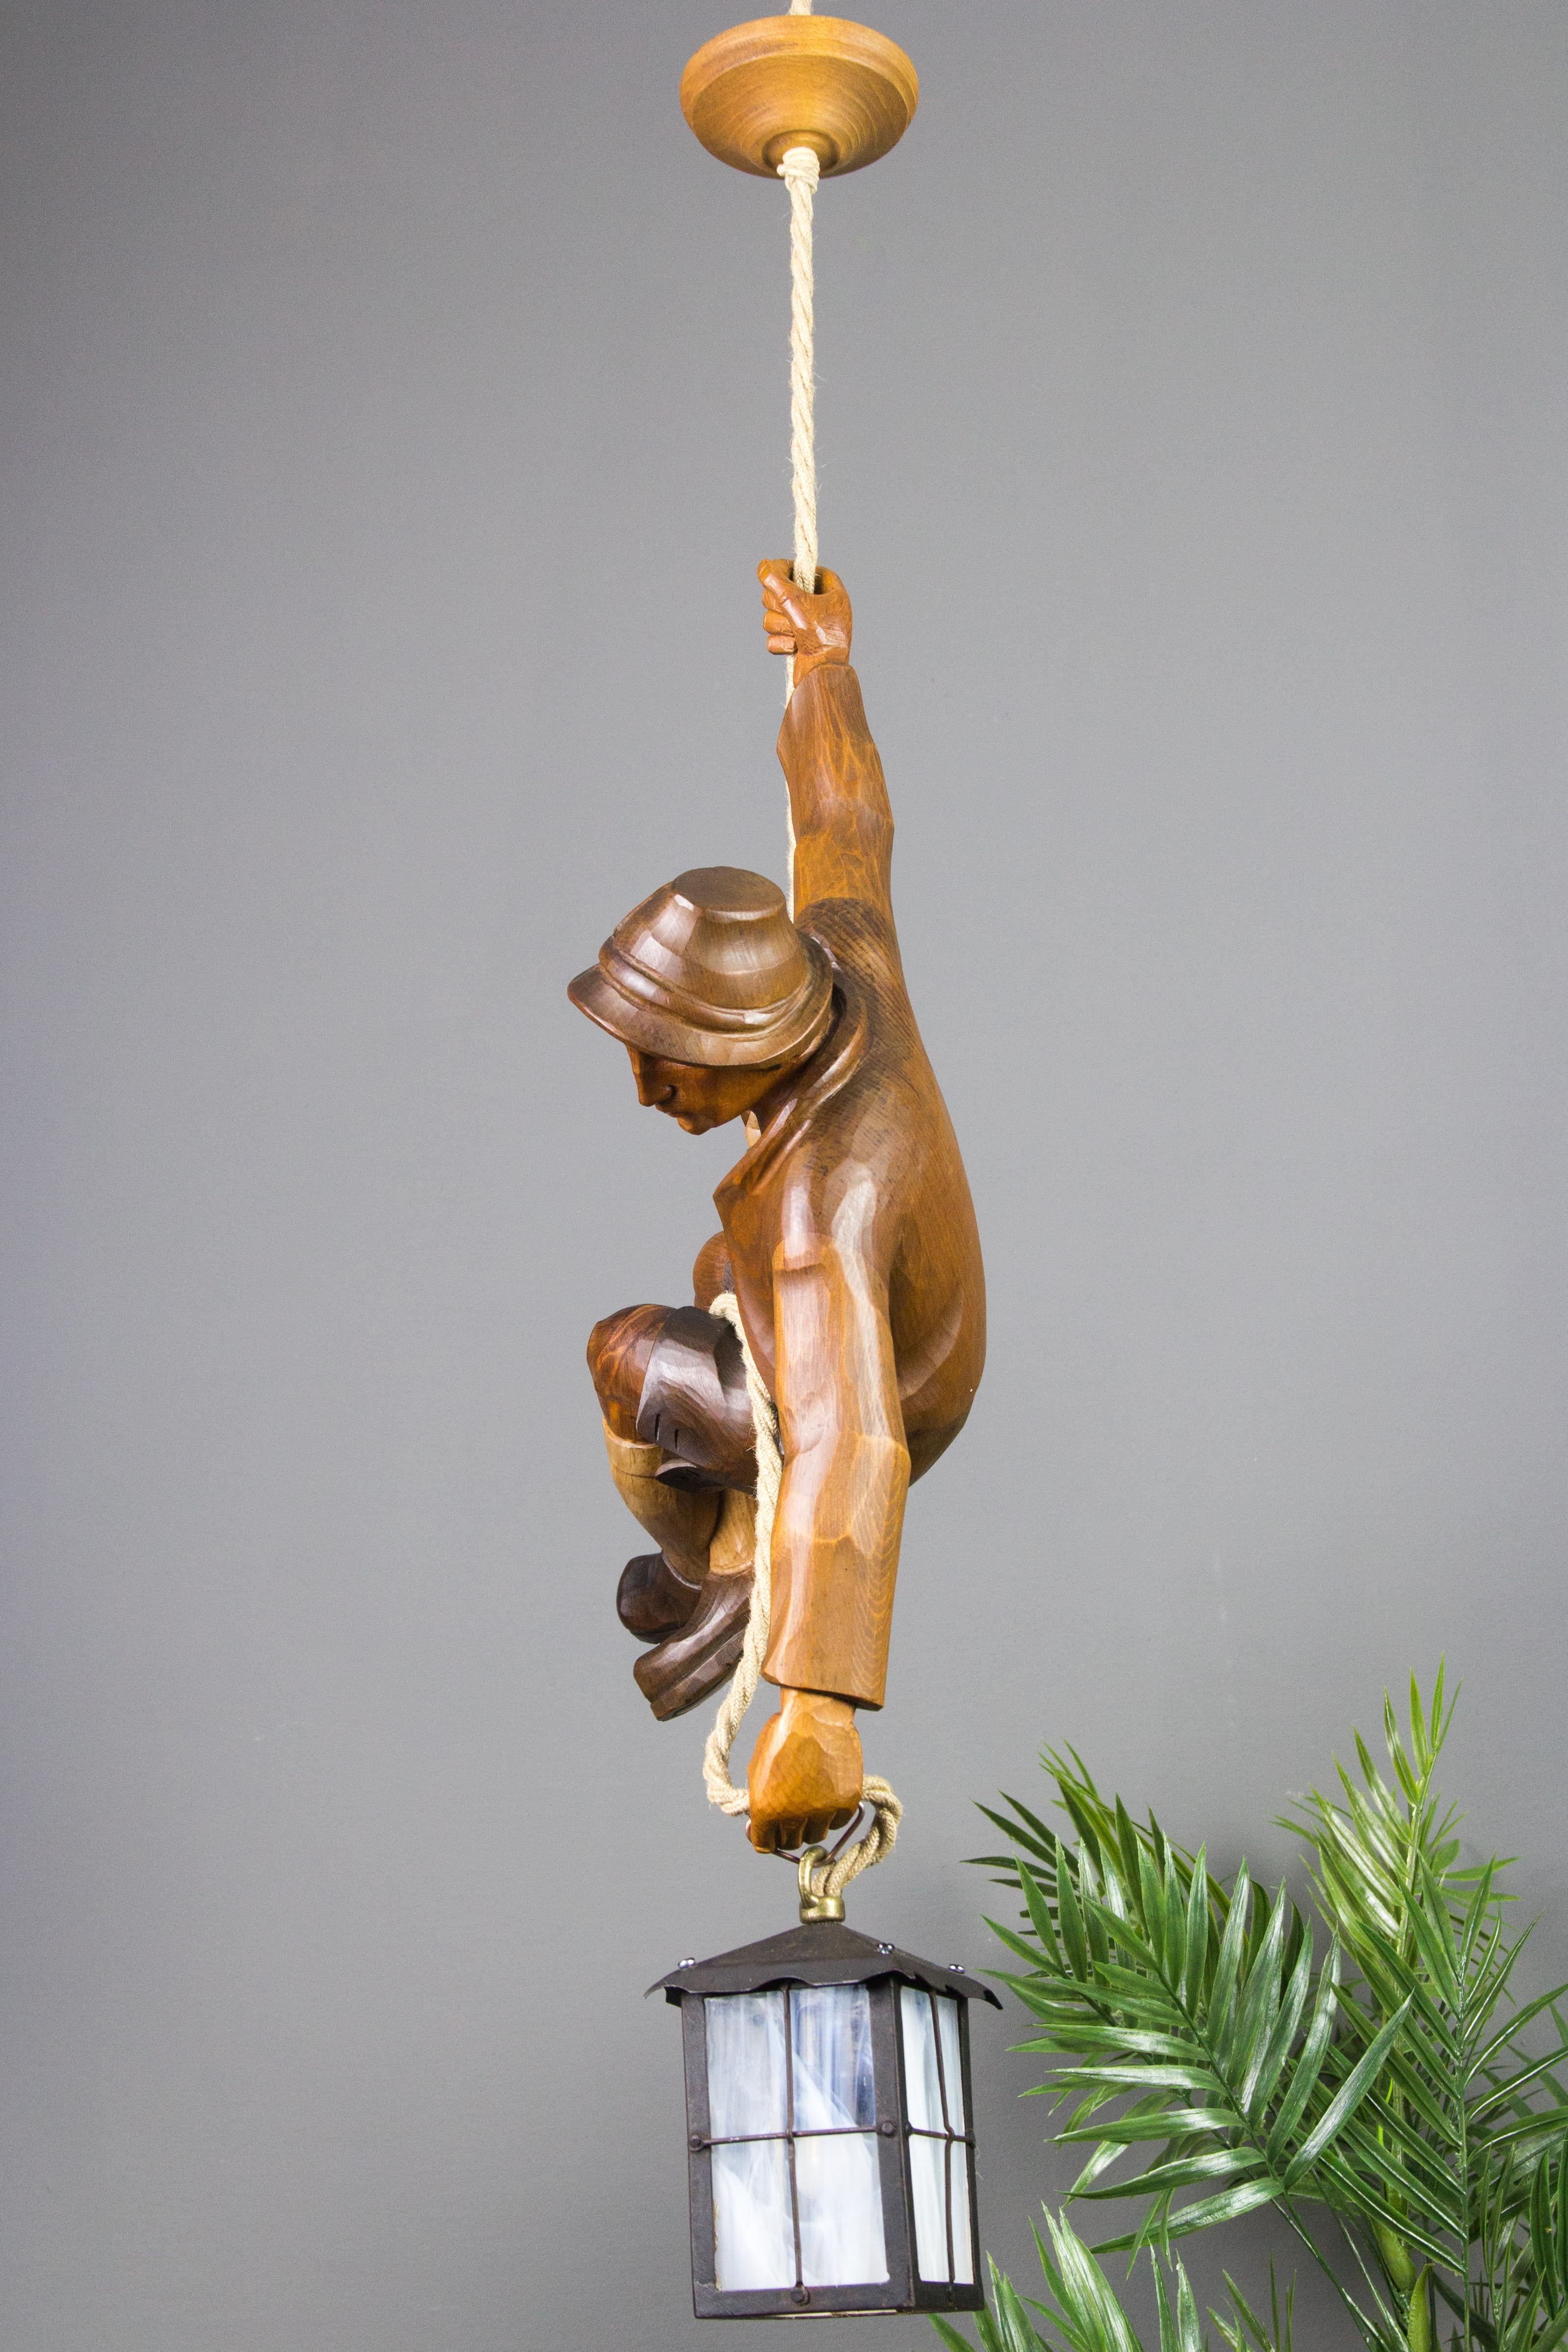 Metal Figural Pendant Light of a Hand Carved Wood Figure Mountain Climber with Lantern